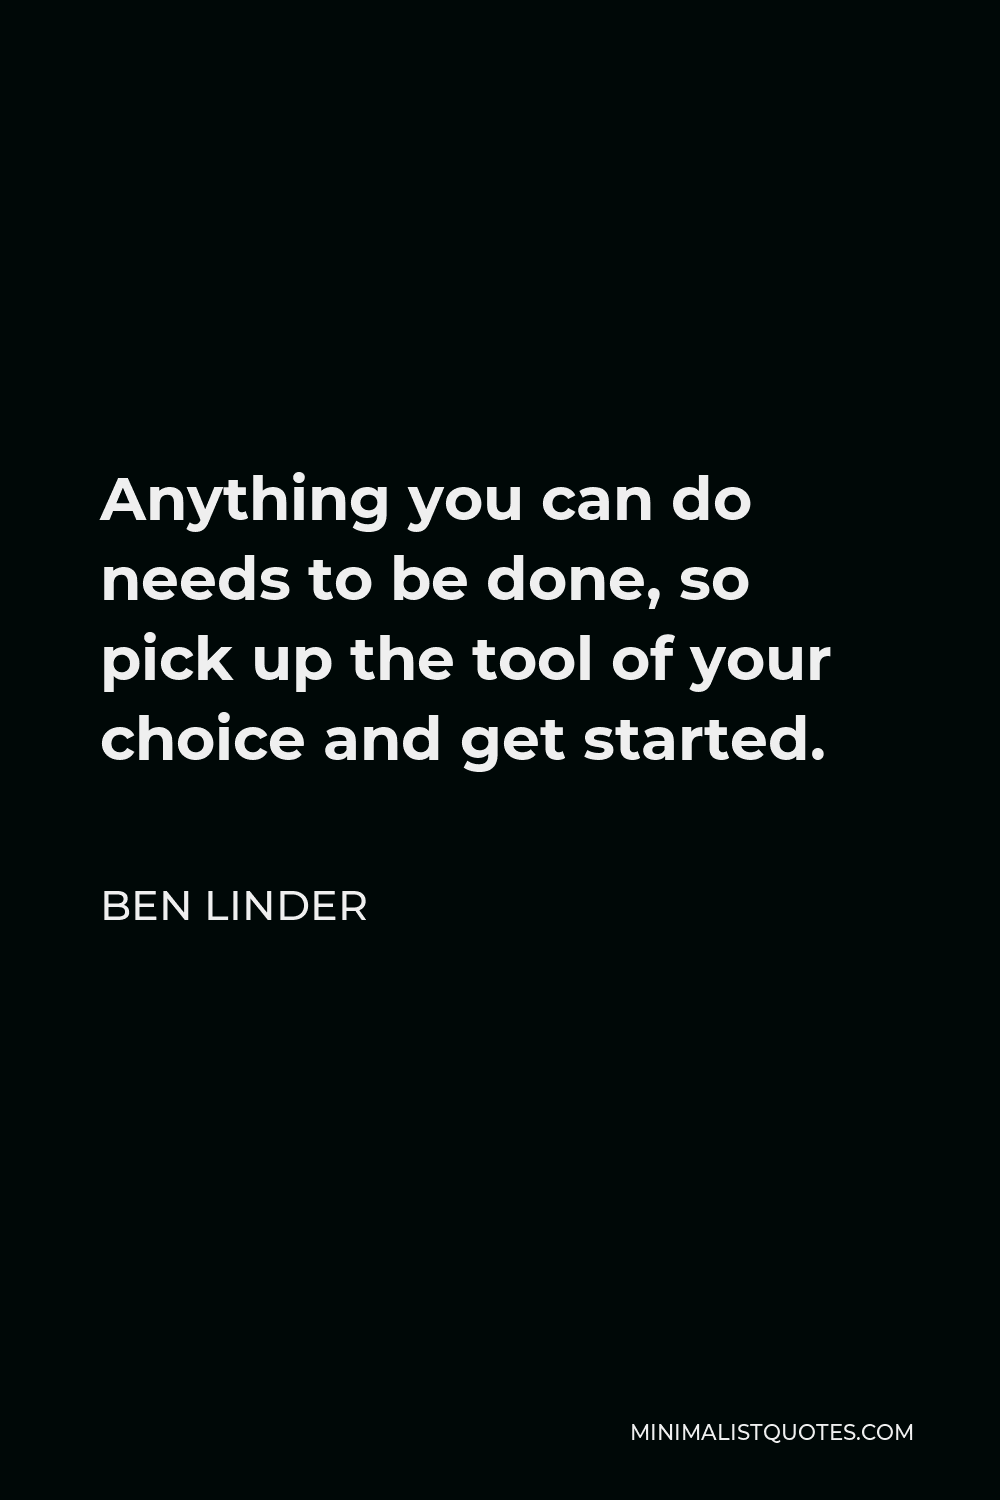 Ben Linder Quote - Anything you can do needs to be done, so pick up the tool of your choice and get started.